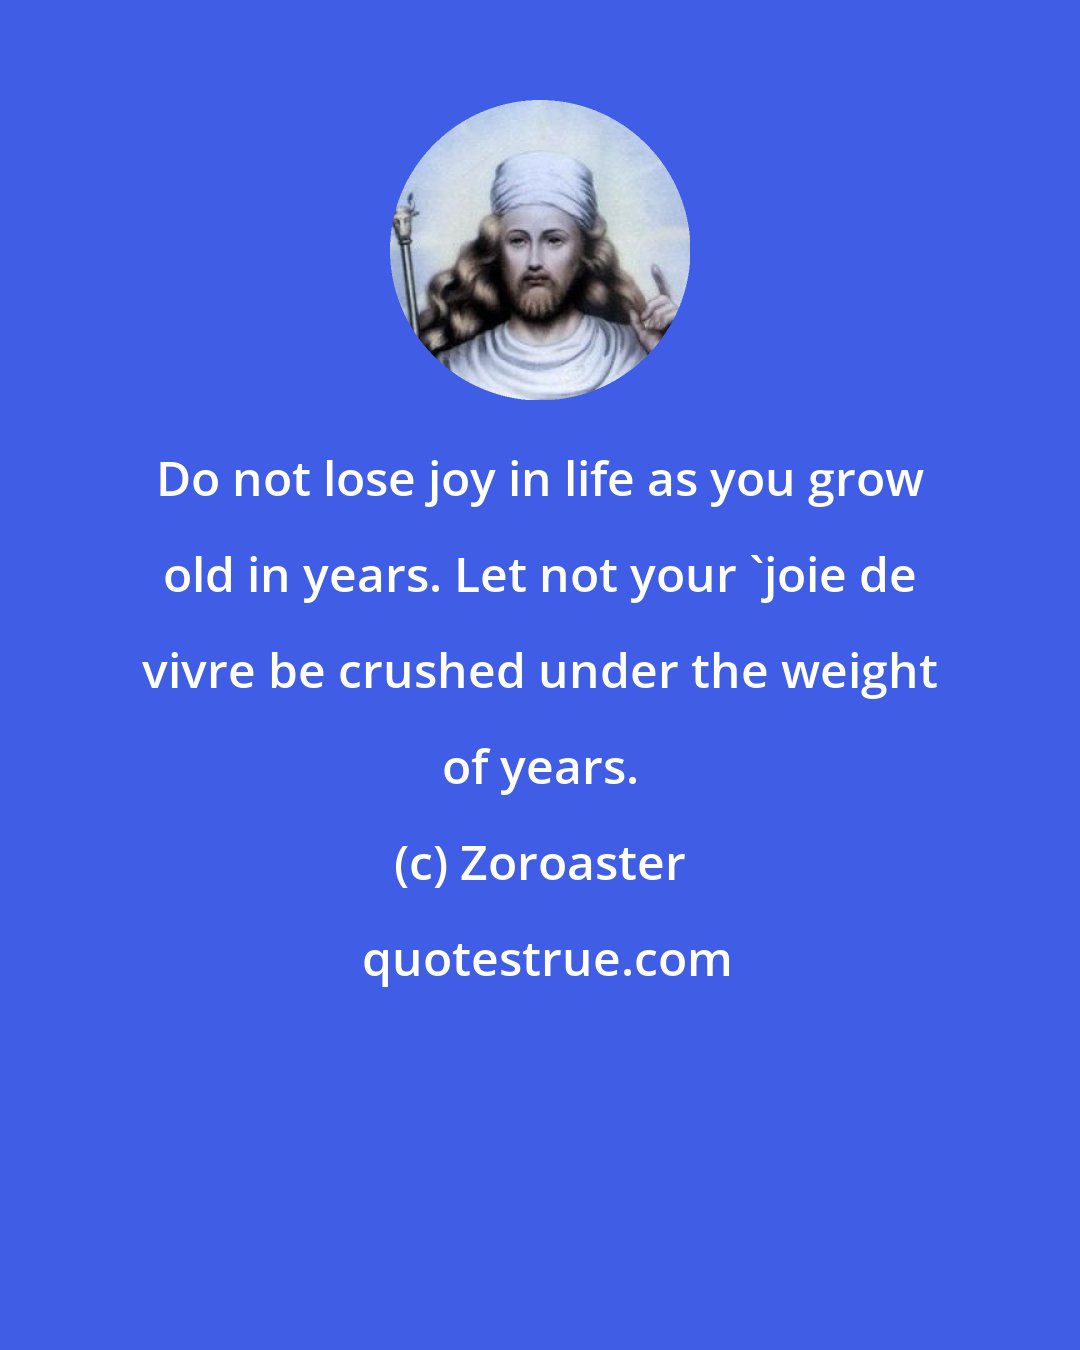 Zoroaster: Do not lose joy in life as you grow old in years. Let not your 'joie de vivre be crushed under the weight of years.